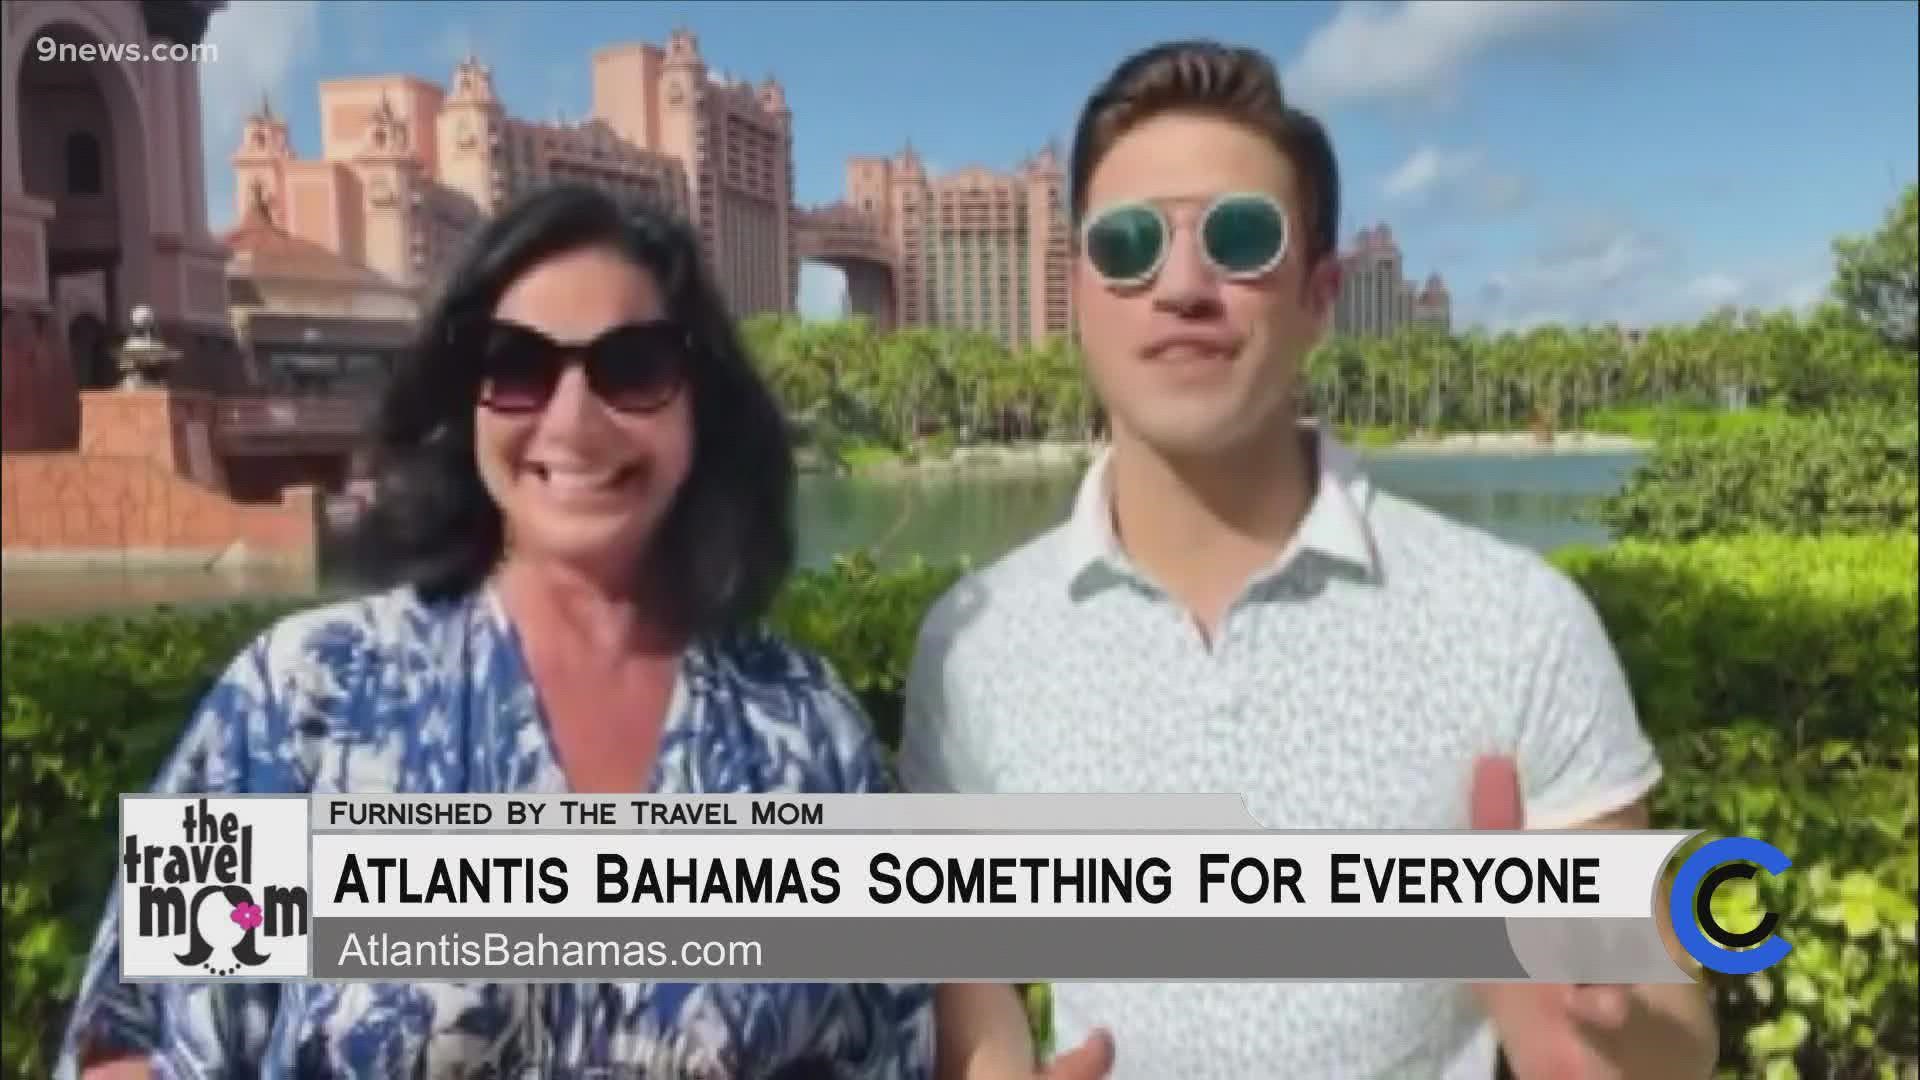 Get all your travel tips from the Travel Mom. Learn more at TheTravelMom.com and AtlantisBahamas.com. **PAID CONTENT**